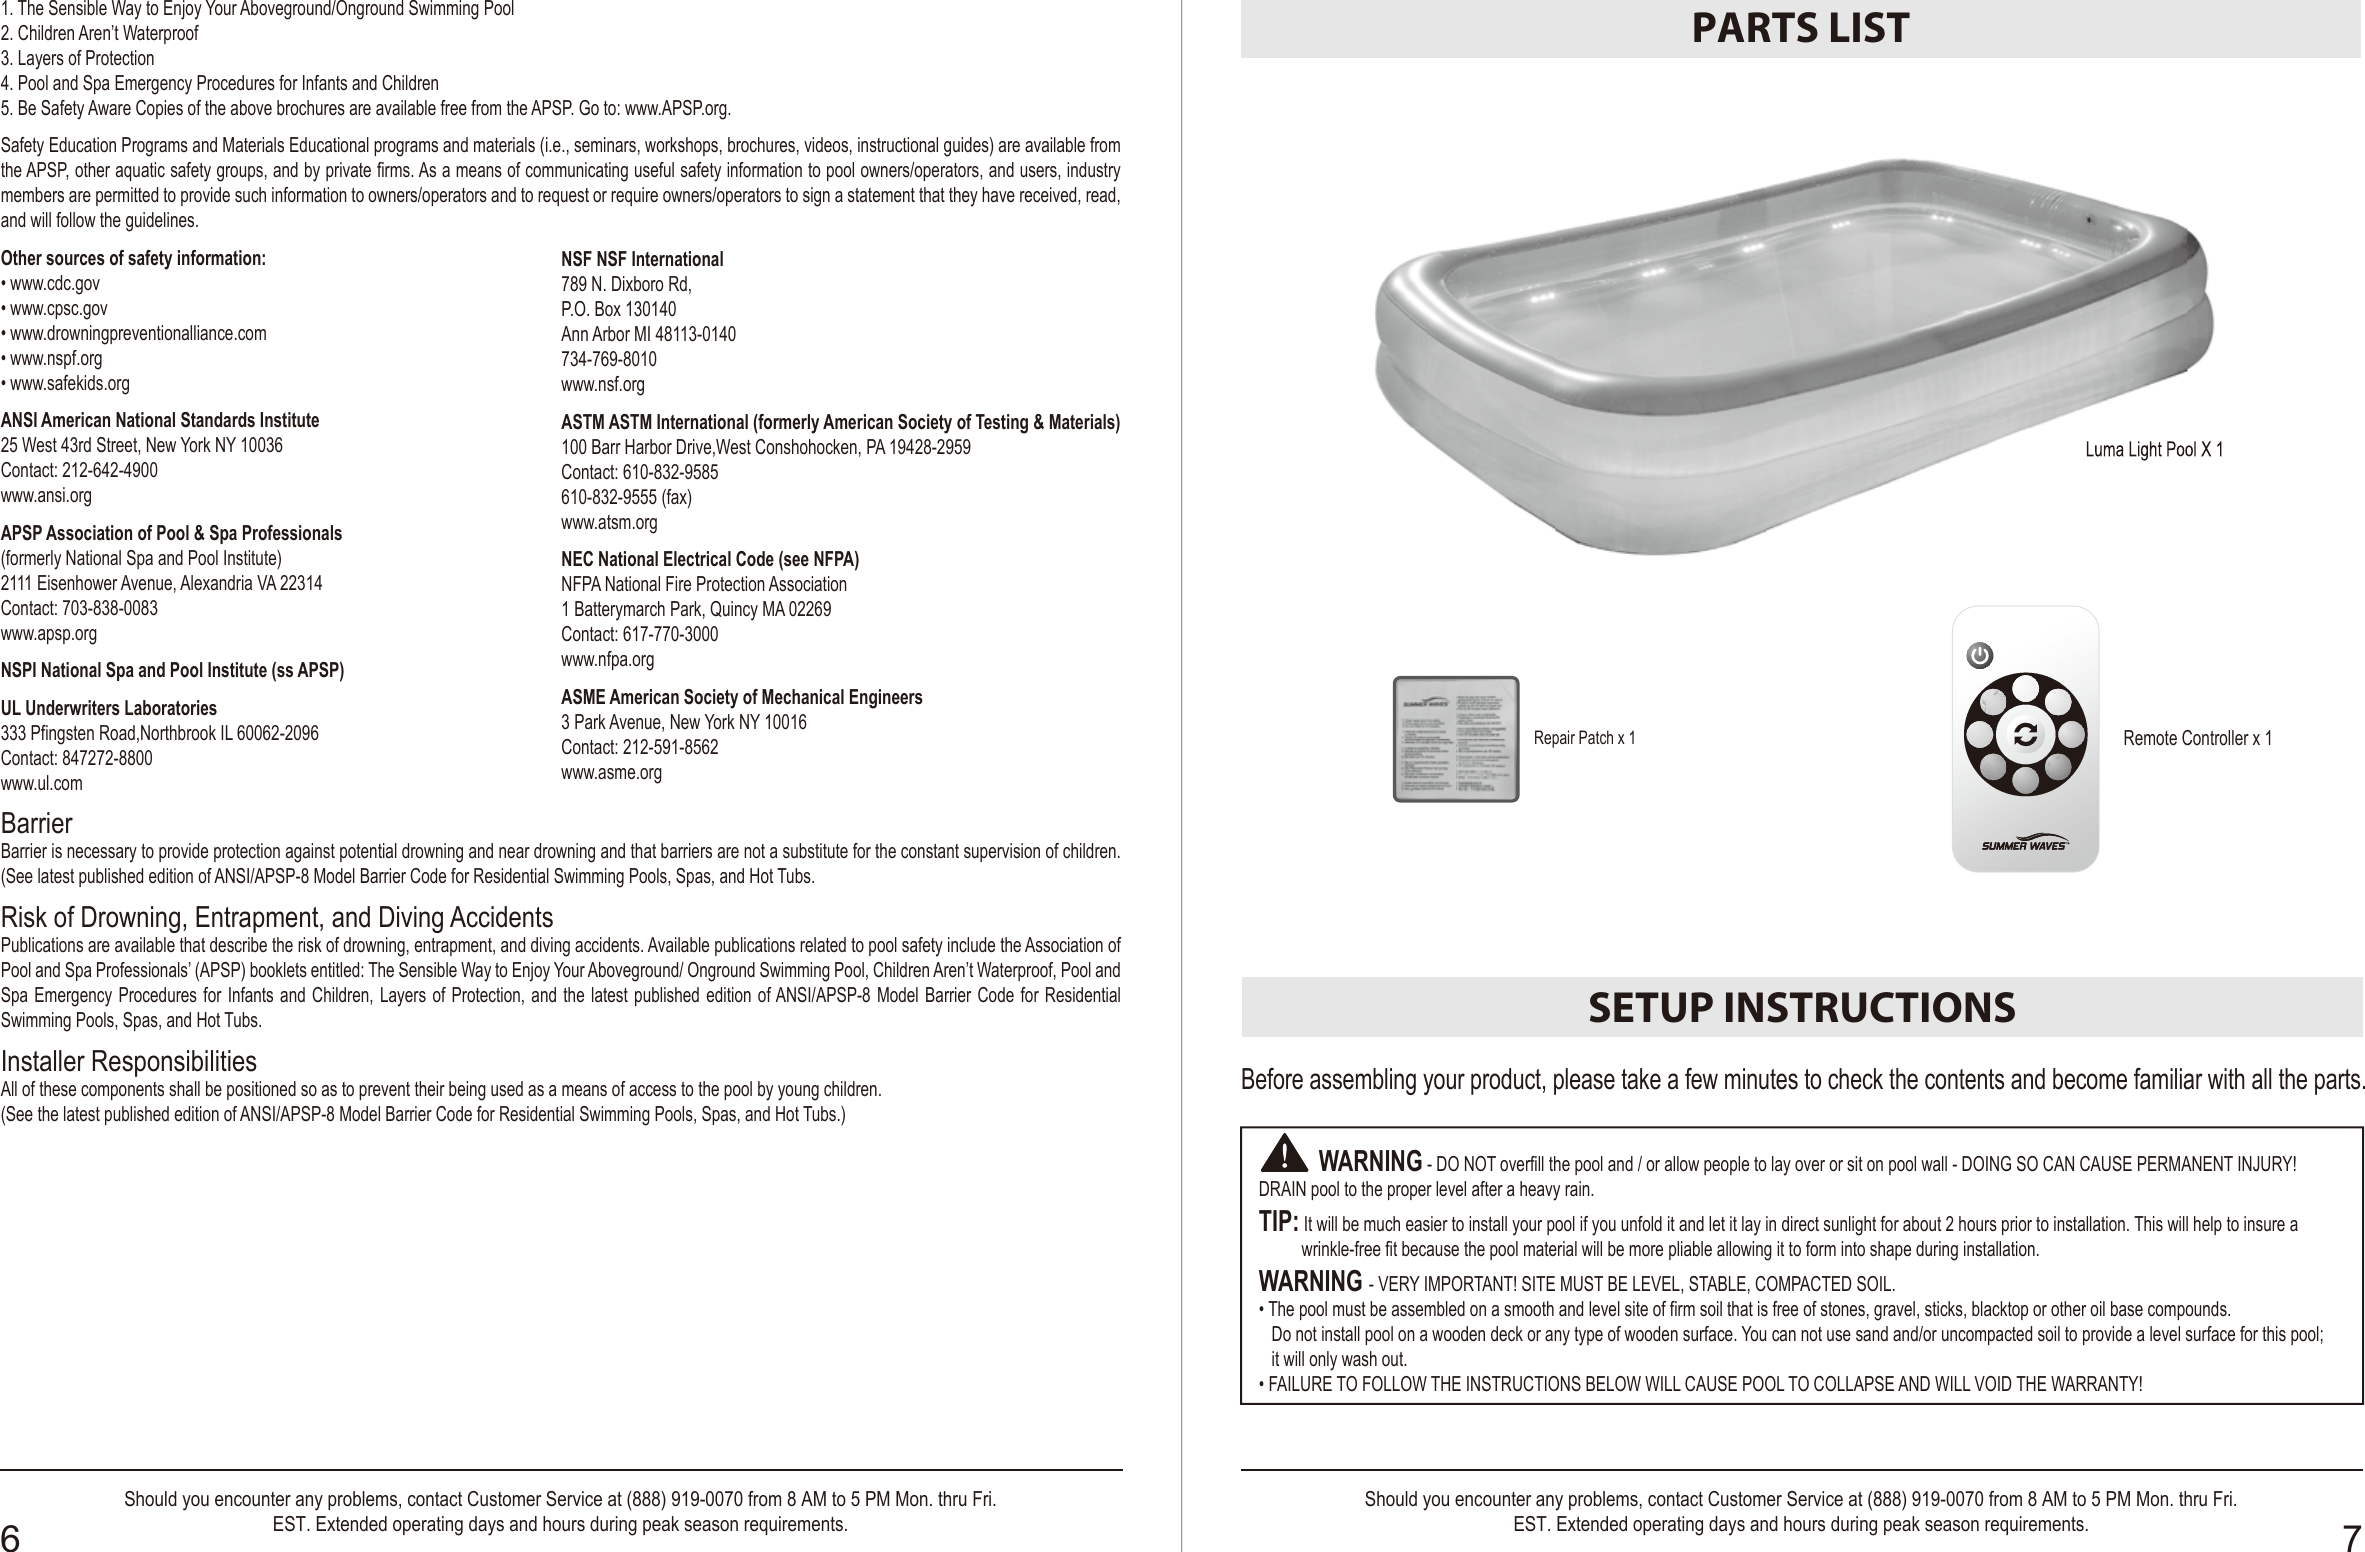 Luma Light Pool X 1PARTS LISTRemote Controller x 1SETUP INSTRUCTIONSBefore assembling your product, please take a few minutes to check the contents and become familiar with all the parts.          WARNING - DO NOT overfill the pool and / or allow people to lay over or sit on pool wall - DOING SO CAN CAUSE PERMANENT INJURY! DRAIN pool to the proper level after a heavy rain. TIP: It will be much easier to install your pool if you unfold it and let it lay in direct sunlight for about 2 hours prior to installation. This will help to insure a           wrinkle-free fit because the pool material will be more pliable allowing it to form into shape during installation.WARNING - VERY IMPORTANT! SITE MUST BE LEVEL, STABLE, COMPACTED SOIL.• The pool must be assembled on a smooth and level site of firm soil that is free of stones, gravel, sticks, blacktop or other oil base compounds.    Do not install pool on a wooden deck or any type of wooden surface. You can not use sand and/or uncompacted soil to provide a level surface for this pool;   it will only wash out.• FAILURE TO FOLLOW THE INSTRUCTIONS BELOW WILL CAUSE POOL TO COLLAPSE AND WILL VOID THE WARRANTY!      Luma Light Pool X 1OWNER′S MANUAL6 7Should you encounter any problems, contact Customer Service at (888) 919-0070 from 8 AM to 5 PM Mon. thru Fri.EST. Extended operating days and hours during peak season requirements.Should you encounter any problems, contact Customer Service at (888) 919-0070 from 8 AM to 5 PM Mon. thru Fri.EST. Extended operating days and hours during peak season requirements.Repair Patch x 1Safety Care for Children1. Children, especially children younger than five years, are at high risk of drowning. Drowning occurs silently and quickly and can occur in as little as 2 in. (5 cm) of     water.2. Keep children in your direct sight, stay close, and actively supervise them when they are in or near this pool and when you are filling and emptying this pool.3. When searching for a missing child, check the pool first, even if the child is thought to be in the house.4. Locate pumps and filters in such a way that children cannot climb on them and gain access to the pool.Swimming Pool BarriersVery Important: Swimming pool barriers, which restrict access to the pool by small children, may be required by law. A barrier is necessary to provide protection against potential drowning and near drowning. Barriers are not a substitute for constant supervision of children. Check state or local laws and codes before setting up pool.Swimming Pool Equipments1. The use of artificial pool lighting is at the discretion of the pool owner. Lighting, when installed, should be in accordance with Article 680 of the National Electrical     Code (NEC) or its latest approved edition and in consultation with a licensed electrical professional.2. Keep all electrical lines, radios, speakers and other electrical appliances away from the pool.3. Do not place pool near or under overhead electrical lines.4. All electrical components installed in and/ or adjacent to an aboveground/onground residential swimming pool shall be installed in accordance with and shall   comply with the requirements of the latest published edition of NFPA 70, National Electrical Code (NEC®) Article 680, Swimming pools, fountains, and similar    installations, and any state or local code.Swimming Pool Awareness1. The pool is to be assembled by an adult; care should be taken in the unpacking and assembly of the pool, this pool may contain accessible potentially hazardous     sharp edges or sharp points that are a necessary part of the function of the pool.2. During nighttime pool use, artificial lighting shall be used to illuminate all safety signs, ladders, steps, deck surfaces and walks.3. The floor of the pool shall be visible at all times from the outside perimeter of the pool.4. Post a list of emergency telephone numbers such as the nearest available police, fire, ambulance and/or rescue unit. These numbers are to be kept near the     telephone, which is closest to the pool.5. Basic lifesaving equipment, including one of the following should be on hand at all times:  •  A light, strong, rigid pole (shepherds crook) not less than twelve feet (12’) [366 cm] long. •  A minimum one-fourth inch (1/4”) [6.35 mm] diameter rope as long as one and one half (1-1/2) times the maximum width of the pool or fifty feet (50’) [15.24 meters],     whichever is less, which has been firmly attached to a Coast Guard-approved ring buoy having an outside diameter of approximately fifteen inches (15”) [38.1 cm],     or similarly approved flotation device.6. The pool is subject to wear and deterioration. If not maintained properly, certain types of excessive or accelerated deterioration can lead to failure of the pool    structure that might release large quantities of water that could cause bodily harm and property damage.7. Never allow horseplay, diving or jumping into or around the pool. Serious injury, paralysis or death, could result when this rule is disregarded.    DO NOT ALLOW anyone to swim alone without supervision.8. Keep your pool clean and clear. The deepest part of pool must be visible at all times from the outside barrier of the pool. 9. Pool shall be located at a minimum distance of 6 ft (1.83 m) from any receptacle, and all 125-volt 15- and 20-ampere receptacles located within 20 ft (6.0 m) of     the pool shall be protected by a ground fault circuit interrupter (GFCI), where distances are by measuring the shortest path the supply cord of an appliance     connected to the receptacle would follow, without piercing a floor, wall, ceiling, doorway with hinged or sliding door, window opening, or other effective permanent      barrier, to the inside wall of the pool.ChemicalsFor safety sake, ensure the deepest part of the pool is always visible. The user must properly maintain clarify of the pool water at all time. Check the pH and chlorine levels periodically and make sure they are within the recommended limits. Additional water treatment chemicals might be needed from time to time. Have the water sample tested by a local pool supply store to determine if additional chemical is needed. Turn on the filter pump system for at least six hours per day. Clean and replace filter cartridge frequently. Replace only with genuine Polygroup® / Summer Wave™ Brand filter cartridge. Refer to the Filter Pump manual for additional water care information.Entrapment Risk1. Entrapment Avoidance: There shall be no protrusions or other obstruction in the swimming area, which may cause entrapment or entanglement of the user.    If a suction outlet cover is missing or broken, do not use the pool. Suction can cause body part entrapment, hair and jewelry entanglement, evisceration, or drowning.     Repair or replace the suction outlet cover before allowing the pool to be used.2. DANGER! TO AVOID SERIOUS INJURY OR DEATH, CLOSE THE POOL OR SPA TO BATHERS IF ANY SUCTION OUTLET COVER/GRATE IS MISSING,     BROKEN OR INOPERATIVE. 3. Never play or swim near drains or suction fittings. Your body or hair may be trapped causing permanent injury or drowning.4. Never enter the pool or spa if a suction fitting or drain cover is loose, broken, or missing. 5. Immediately notify the pool/spa owner or operator if you find a drain cover loose, broken or missing.Drowning Risk1. Keep unsupervised children from accessing the pool by installing fencing or other approved barrier around all sides of pool. State or local laws or codes may    require fencing or other approved barriers. Check state or local laws and codes before setting up pool.2. Toys, chairs, tables or similar objects that a young child could climb shall be at least four feet (4’) [121.92 cm] from the pool. The pump filter system shall be     positioned so as to prevent it being used as a means of access to the pool by young children. Do not leave toys inside pool when finished using, since toys and      similar items might attract a child to the pool.3. Position furniture (for example, tables, chairs) away from pool and so that children cannot climb on it to gain access to the pool.4. After using pool, remove water to a level of 1 ⁄ 2 in. (1 cm) or less.Diving Risk1. Above ground / onground residential swimming pools are for swimming and wading only. No diving boards, slides or other equipment are to be added to an above     ground / onground pool that in any way indicates that an above ground / onground pool may be used or intended for diving or sliding purposes.2. Do not dive into this pool. Diving into shallow water can result in a broken neck, paralysis, or death. Electrocution Risk1. Keep all electrical lines, radios, speakers and other electrical appliances away from the pool. 2. Do not place pool near or under overhead electrical lines.First Aid1. Keep a working phone and a list of emergency numbers near the pool.2. Become certified in cardiopulmonary resuscitation (CPR). In the event of an emergency, immediate use of CPR can make a lifesaving difference.Special Warning1. Local building codes may require obtaining a building or electrical permit. Installer shall follow regulations on setback, barriers, devices and other conditions.2. Safety signs shall comply with requirements of ANSI-Z535 and to use signal wording.3. DO NOT attempt to assemble this pool in adverse weather conditions, windy conditions or when the temperature is below 60°F.   4. This is a storable pool, which should be disassembled and stored when temperatures are expected to fall below 32°F.5. The installer shall ensure that all pools and their related components that are installed in an indoor environment shall comply with the ventilation requirements of ANSI/ASHREAE62 or the latest published edition of Ventilation for acceptable indoor air quality, Table 2, Article 2.16. The placement of the pool and portable pools shall be set up so that they comply with local safety and building codes. 7. WARNING! Competent supervision and knowledge of the safety requirements is the only way to prevent drowning or permanent injury in the use of this product! Never leave your children unattended.  FCC noticesThis device complies with Part 15 of the FCC Rules.  Operation is subject to the following two conditions: 1. this device may not cause harmful interference, and 2. this device must accept any interference received, including interference that may cause undesired operation.WARNING! Changes or modifications to this unit not expressly approved by the party responsible for compliance could void the user’s authority to operate the equipment.”NOTE: This equipment has been tested and found to comply with the limits for a Class B digital device, pursuant to Part 15 of the FCC Rules. These limits are designed to provide reasonable protection against harmful interference in a residential installation. This equipment generates, uses and can radiate radio frequency energy and, if not installed and used in accordance with the instructions, may cause harmful interference to radio communications.However, there is no guarantee that interference will not occur in a particular installation. If this equipment does cause harmful interference to radio or television reception, which can be determined by turning the equipment off and on, the user is encouraged to try to correct the interference by one or more of the following measures:•  Reorient or relocate the receiving antenna.•  Increase the separation between the equipment and receiver.•  Connect the equipment into an outlet on a circuit different from that to which the receiver is connected.•  Consult the dealer or an experienced radio/TV technician for help.”Pool Maintence 1. Empty pool completely after each use and store the empty pool in such a way that it does not collect water from rain or any other source.2. After using pool, remove water to a level of 1/2 in. (1 cm) or less.Extra Safety Warning1. Teach your children to swim.2. Never dive, jump, or slide into the pool.3. Adult supervision is always required.4. Parents should learn CPR.5. Never swim alone.6. When you touch the filter, pump, or electrical parts, be sure the ground under your feet is “Bone Dry.”7. Connect power cords to a 3-wire grounding-type outlet only.8. Keep all breakable objects out of the pool area.9. Alcohol consumption and pool activities do not mix. Never allow anyone to swim, dive or slide under the influence of alcohol or drugs.10. Severe electrical shock could result if you install your pump or filter on a deck. The pump or filter could fall into the water, causing severe shock or electrocution.11. Do not install on a deck or other surface at, above, or slightly below the top rail of the pool.12. Do not use the pool during severe weather conditions, i.e. electrical storms, tornadoes, etc.13. Be aware of overhead power lines when vacuuming your pool or using a telescoping pole.14. Do not allow diving, climbing, sitting, or standing on the top rails of the pools.15. Do not allow roughhousing and horseplay.16. Do not engage in extended breath holding activities underwater; you may black out and drown.17. Keep deck clean and clear of objects that may create a tripping hazard.18. Check regularly for signs of wear or loose bolts that could make the deck unsafe.19. Instruct pool users about the proper use of all pool ladder(s) and staircases.20. Please contact pool site dealer or manufacturer for additional safety signs if deemed necessary.21. For pool service, select a certified pool professional.      For additional safety information, see www.APSP.org.Consumer Awareness Booklets and Information SourceCONTACT: U.S. Consumer Product Safety Commission at www.CPSC.gov/cpscpub/pubs/pool/pdf, Pub. #362 “Safety Barrier Guidelines for Home  Pools”.1. The Sensible Way to Enjoy Your Aboveground/Onground Swimming Pool2. Children Aren’t Waterproof3. Layers of Protection4. Pool and Spa Emergency Procedures for Infants and Children5. Be Safety Aware Copies of the above brochures are available free from the APSP. Go to: www.APSP.org.Safety Education Programs and Materials Educational programs and materials (i.e., seminars, workshops, brochures, videos, instructional guides) are available from the APSP, other aquatic safety groups, and by private firms. As a means of communicating useful safety information to pool owners/operators, and users, industry members are permitted to provide such information to owners/operators and to request or require owners/operators to sign a statement that they have received, read, and will follow the guidelines.Other sources of safety information:• www.cdc.gov• www.cpsc.gov• www.drowningpreventionalliance.com• www.nspf.org• www.safekids.orgANSI American National Standards Institute25 West 43rd Street, New York NY 10036Contact: 212-642-4900www.ansi.orgAPSP Association of Pool &amp; Spa Professionals(formerly National Spa and Pool Institute)2111 Eisenhower Avenue, Alexandria VA 22314Contact: 703-838-0083www.apsp.orgNSPI National Spa and Pool Institute (ss APSP)UL Underwriters Laboratories333 Pfingsten Road,Northbrook IL 60062-2096Contact: 847272-8800www.ul.comBarrierBarrier is necessary to provide protection against potential drowning and near drowning and that barriers are not a substitute for the constant supervision of children. (See latest published edition of ANSI/APSP-8 Model Barrier Code for Residential Swimming Pools, Spas, and Hot Tubs.Risk of Drowning, Entrapment, and Diving Accidents Publications are available that describe the risk of drowning, entrapment, and diving accidents. Available publications related to pool safety include the Association of Pool and Spa Professionals’ (APSP) booklets entitled: The Sensible Way to Enjoy Your Aboveground/ Onground Swimming Pool, Children Aren’t Waterproof, Pool and Spa Emergency Procedures for Infants and Children, Layers of Protection, and the latest published edition of ANSI/APSP-8 Model Barrier Code for Residential Swimming Pools, Spas, and Hot Tubs.Installer ResponsibilitiesAll of these components shall be positioned so as to prevent their being used as a means of access to the pool by young children.(See the latest published edition of ANSI/APSP-8 Model Barrier Code for Residential Swimming Pools, Spas, and Hot Tubs.)NSF NSF International789 N. Dixboro Rd,  P.O. Box 130140Ann Arbor MI 48113-0140734-769-8010www.nsf.orgASTM ASTM International (formerly American Society of Testing &amp; Materials)100 Barr Harbor Drive,West Conshohocken, PA 19428-2959Contact: 610-832-9585610-832-9555 (fax)www.atsm.orgNEC National Electrical Code (see NFPA)NFPA National Fire Protection Association1 Batterymarch Park, Quincy MA 02269Contact: 617-770-3000www.nfpa.orgASME American Society of Mechanical Engineers3 Park Avenue, New York NY 10016Contact: 212-591-8562www.asme.org